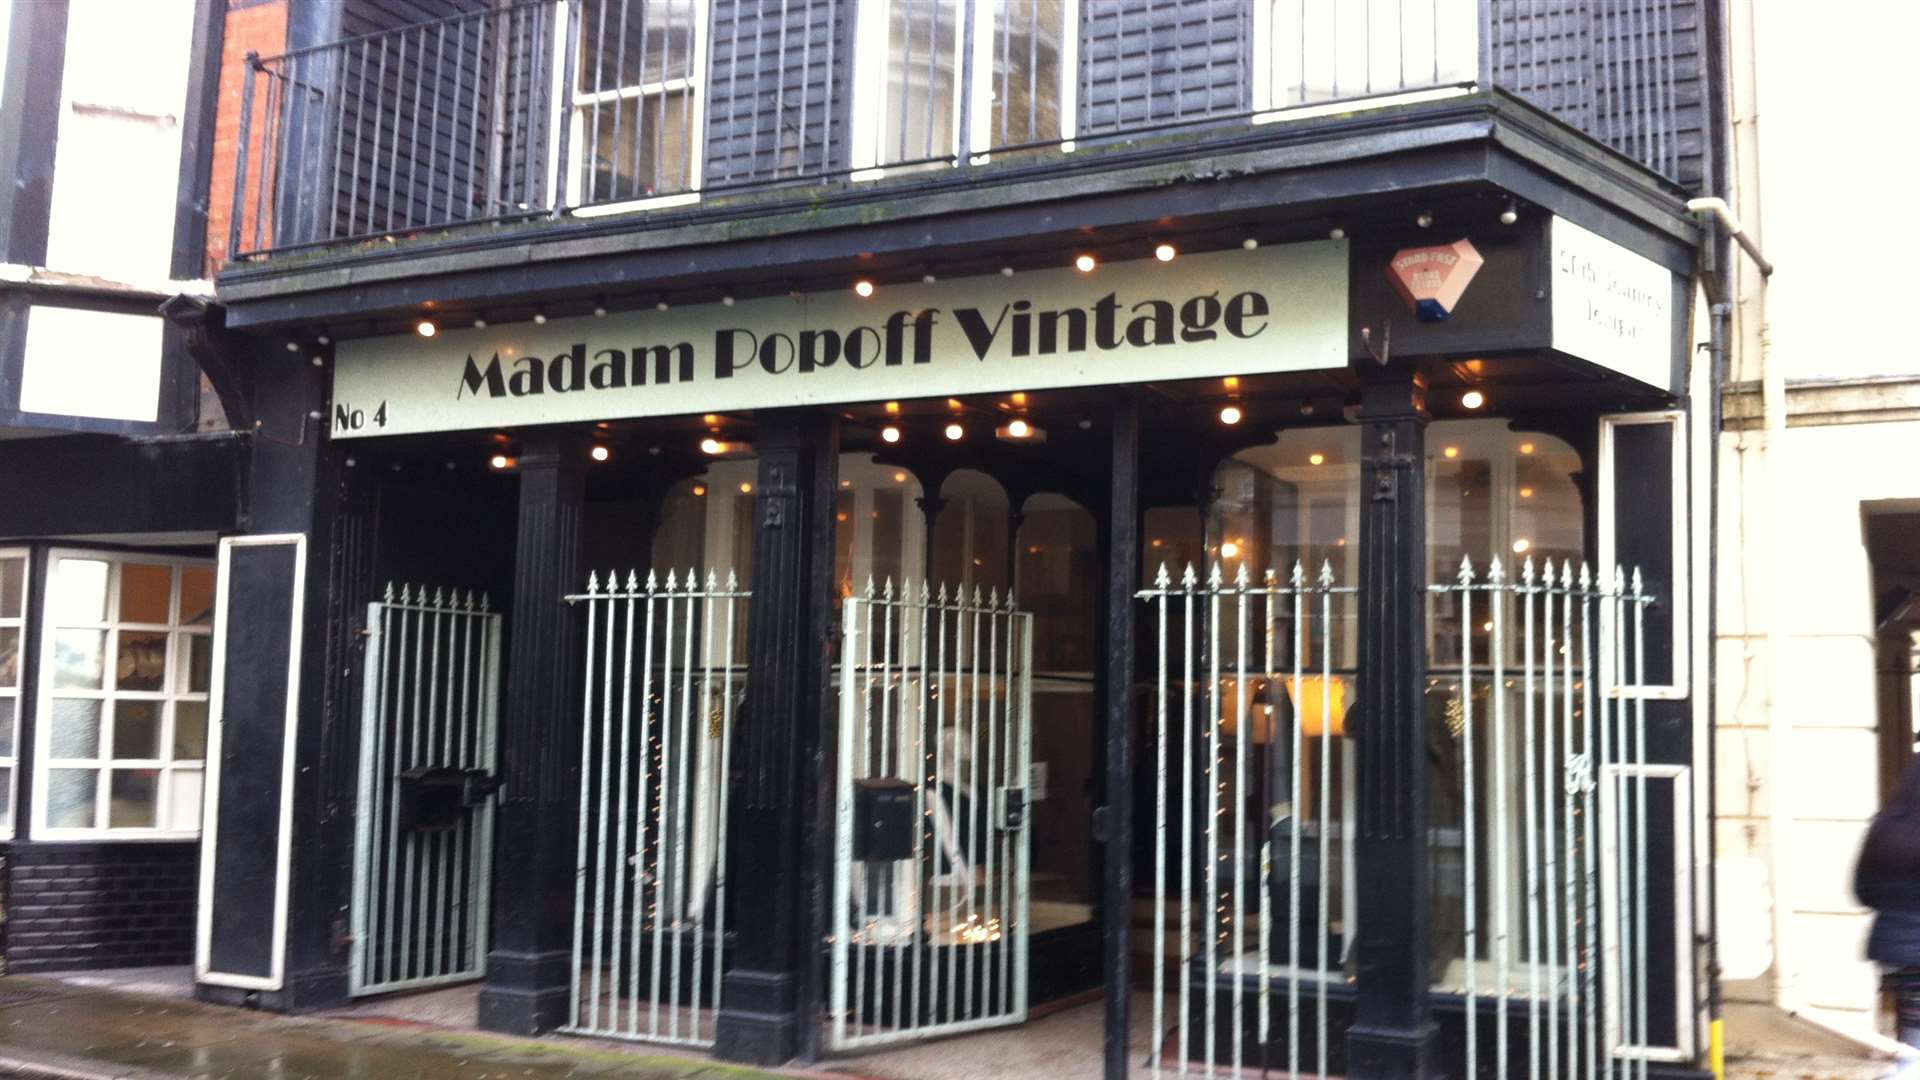 Outside Madam Popoff's vintage clothing store